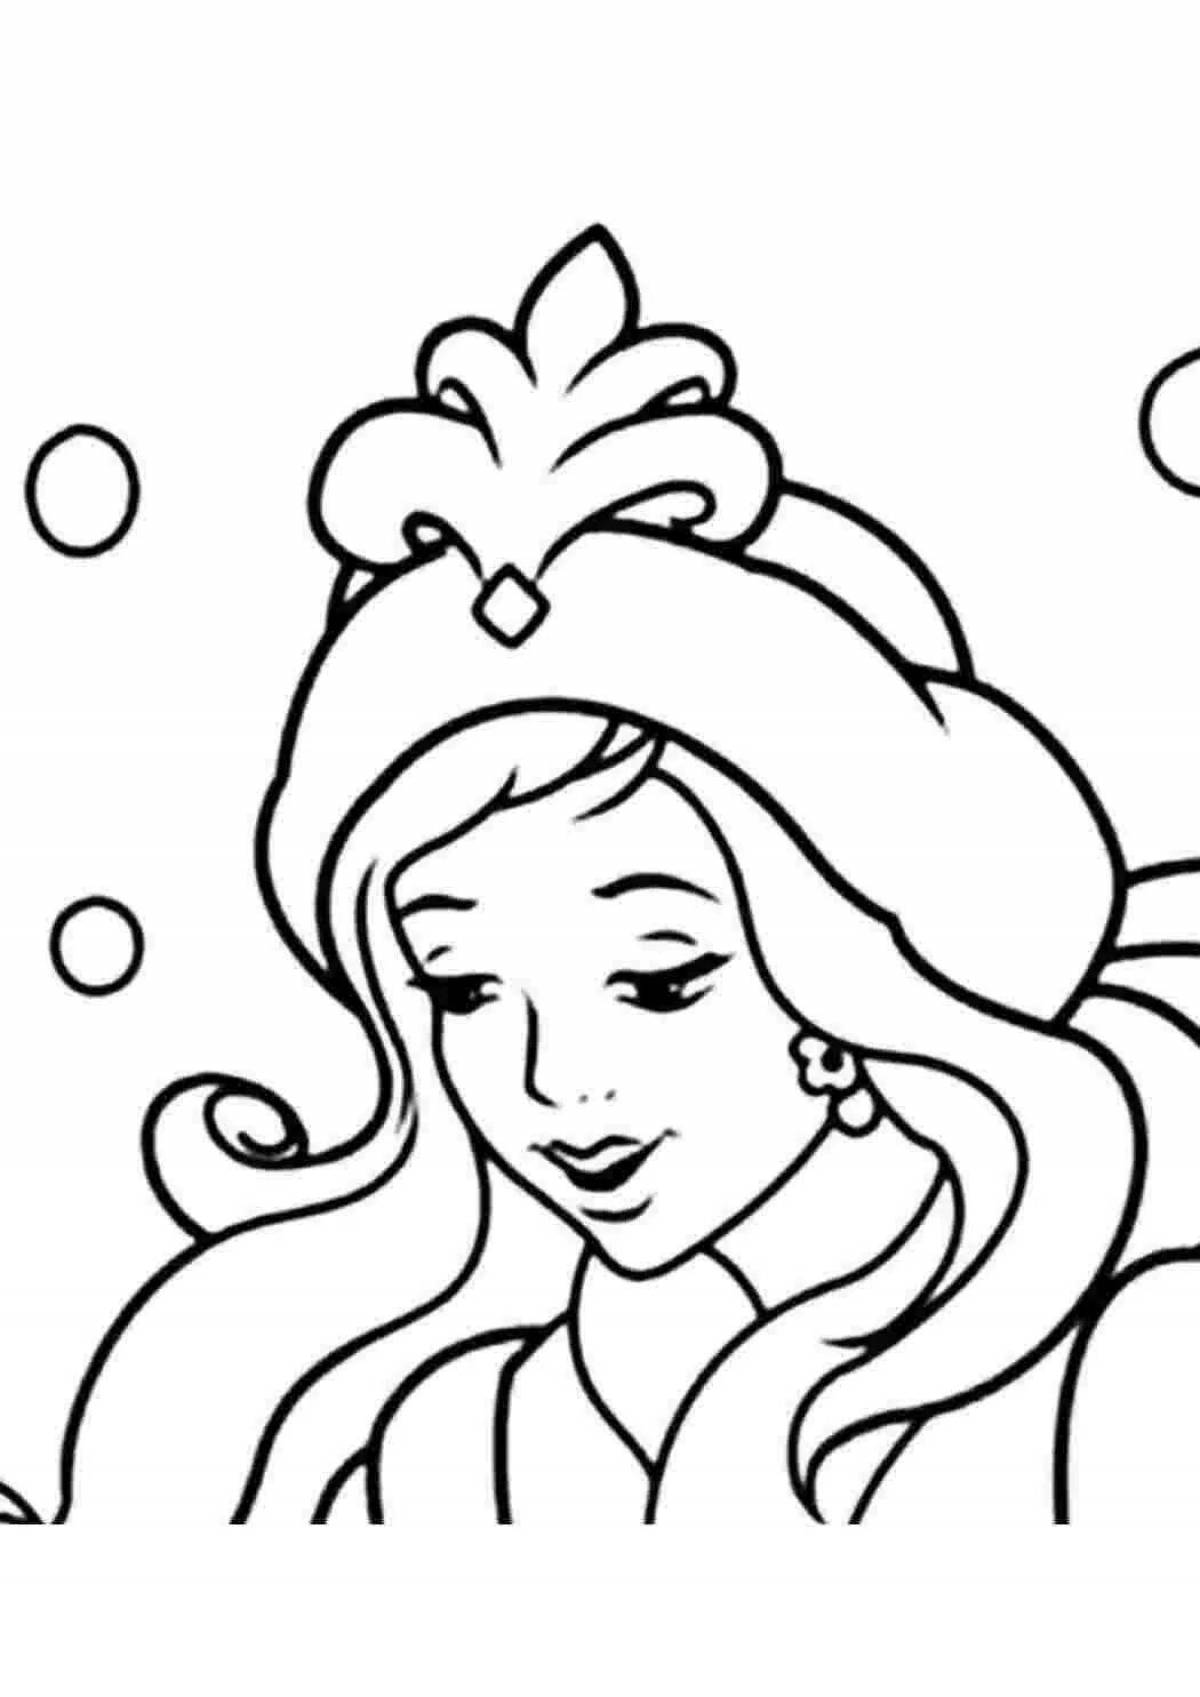 Coloring the face of a cheerful snow maiden